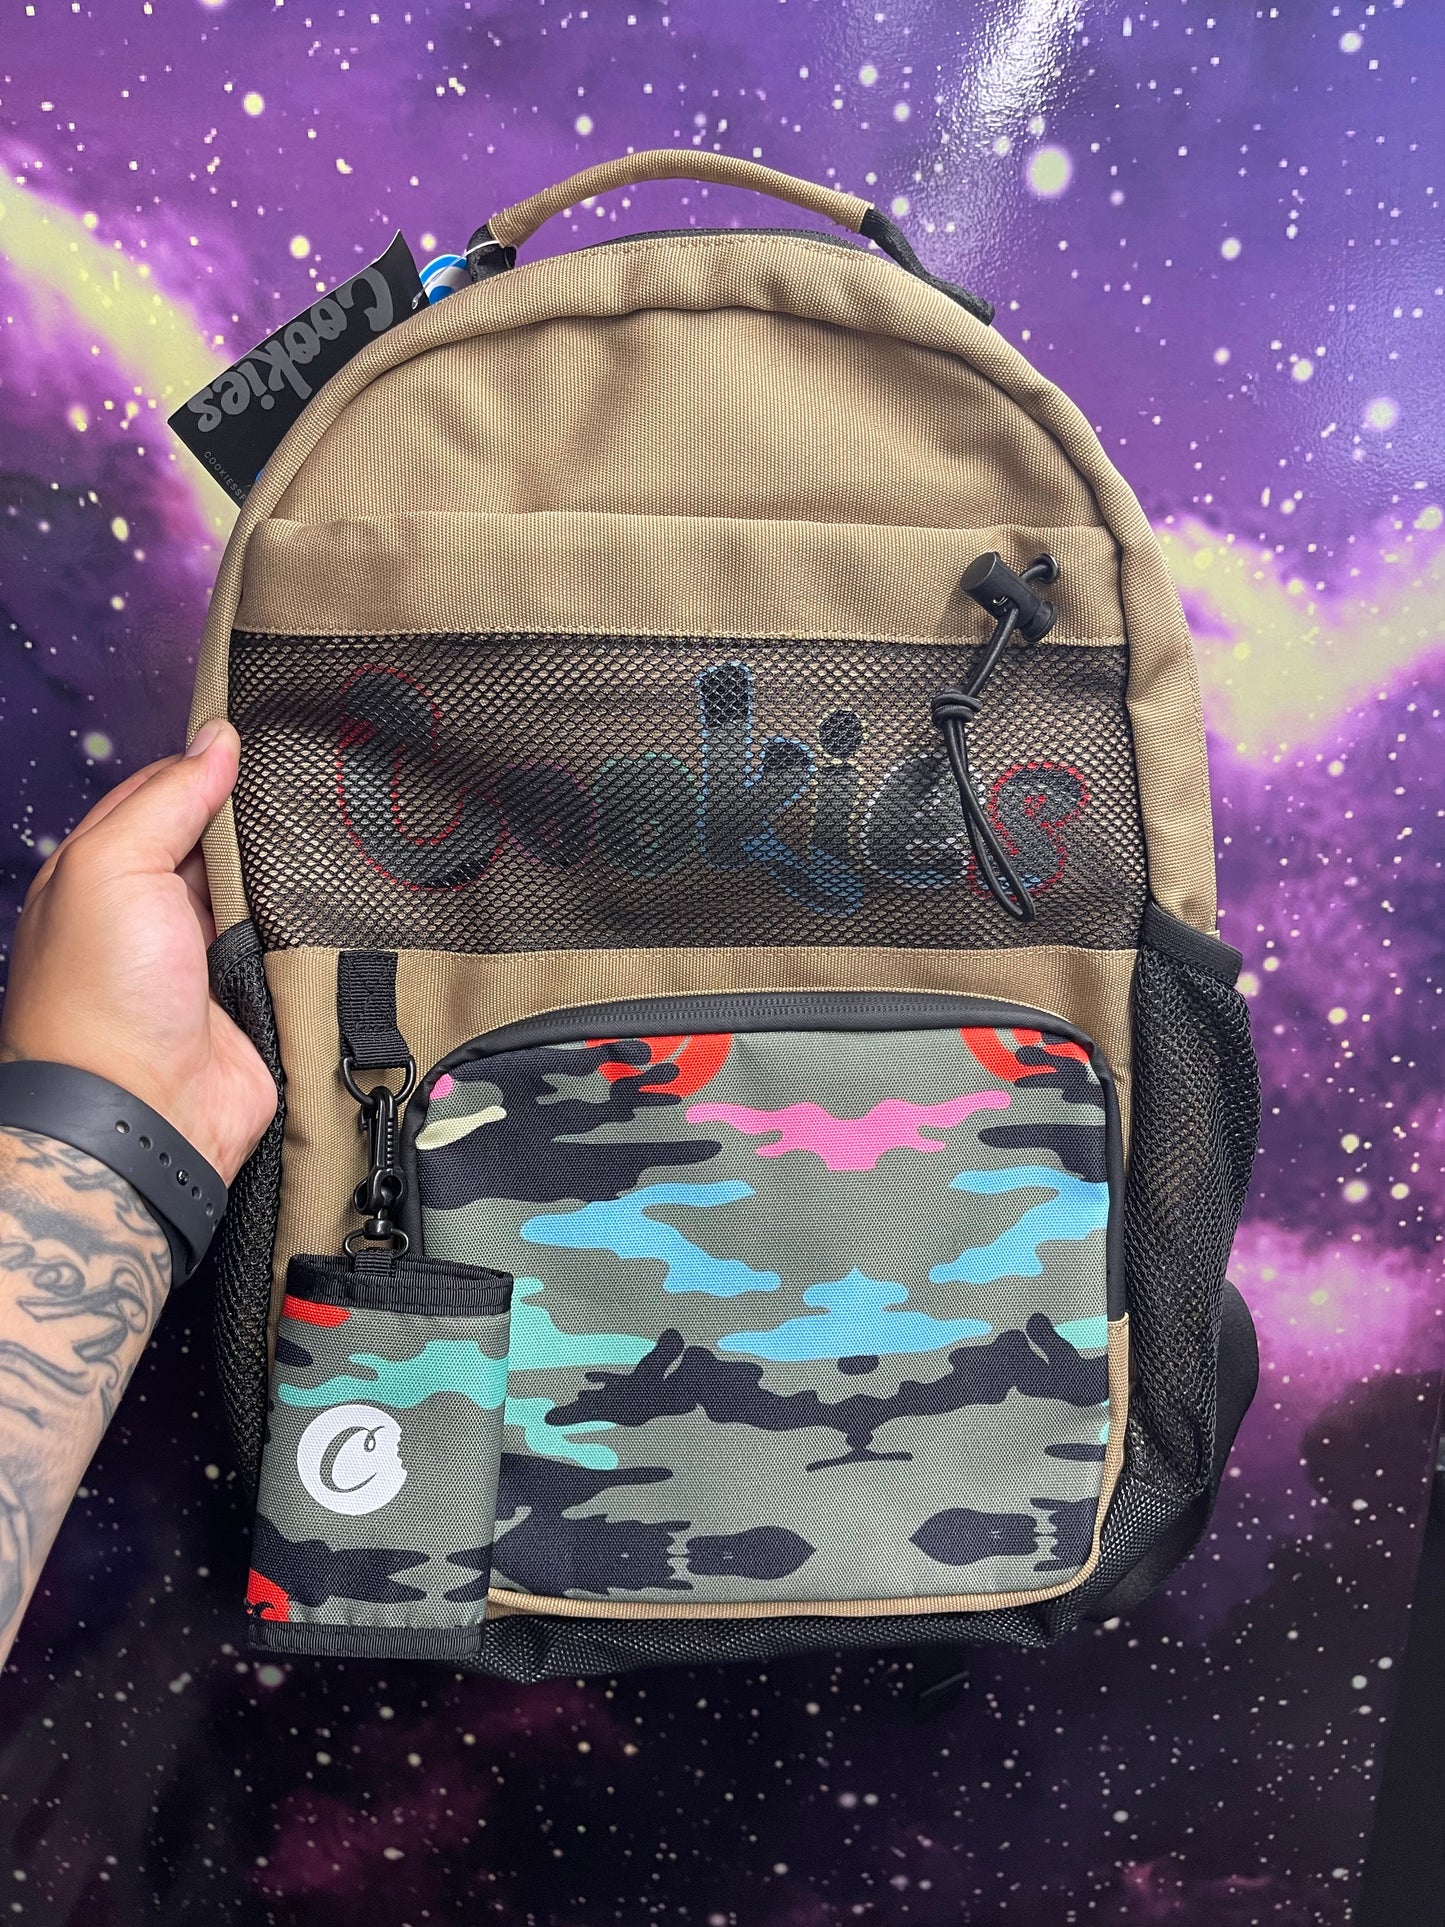 Cookies SF "Escobar" smell proof backpack